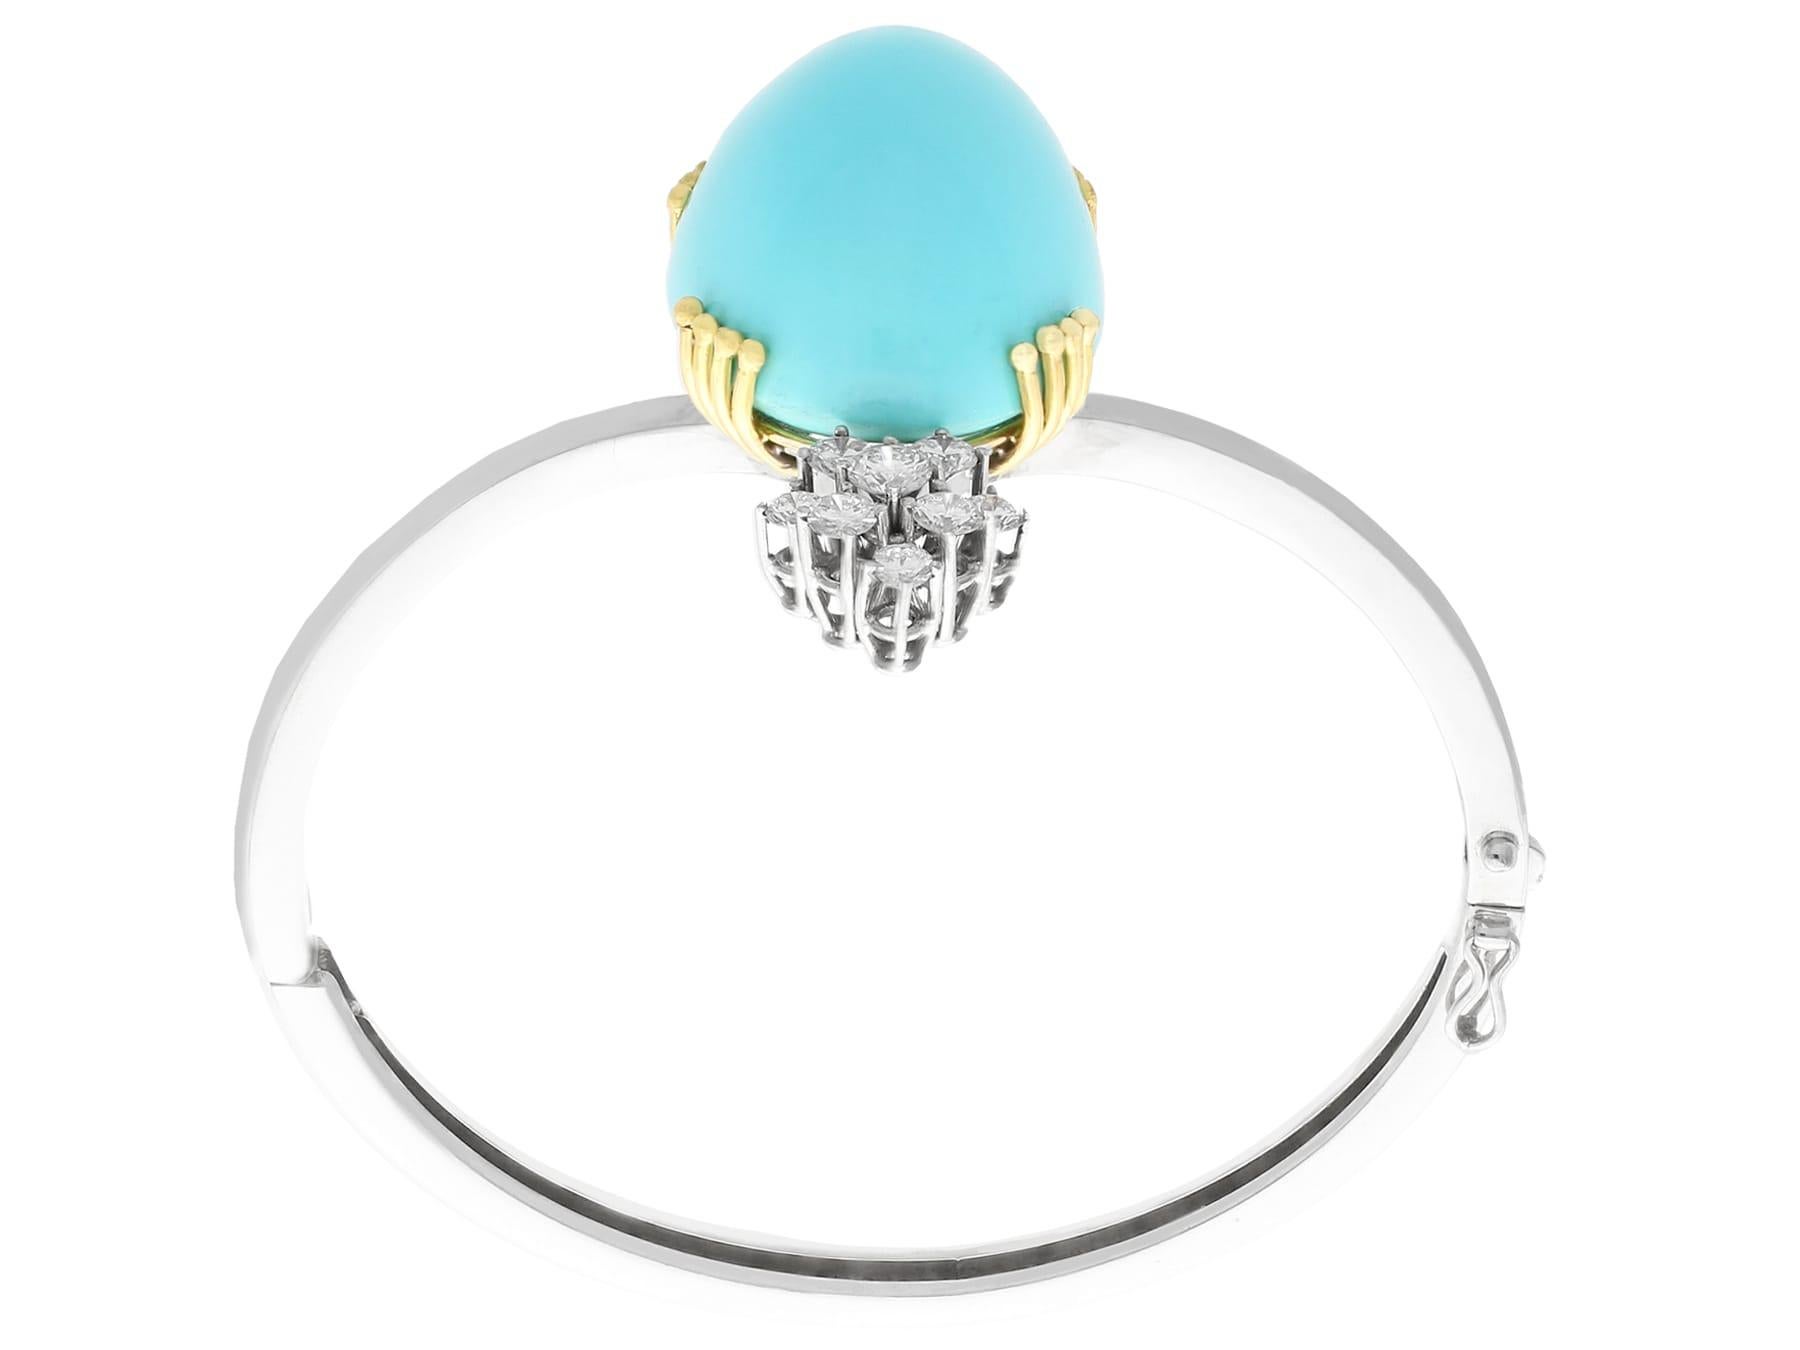 Vintage 43.44 Carat Cabochon Cut Turquoise and Diamond White Gold Bangle For Sale 2